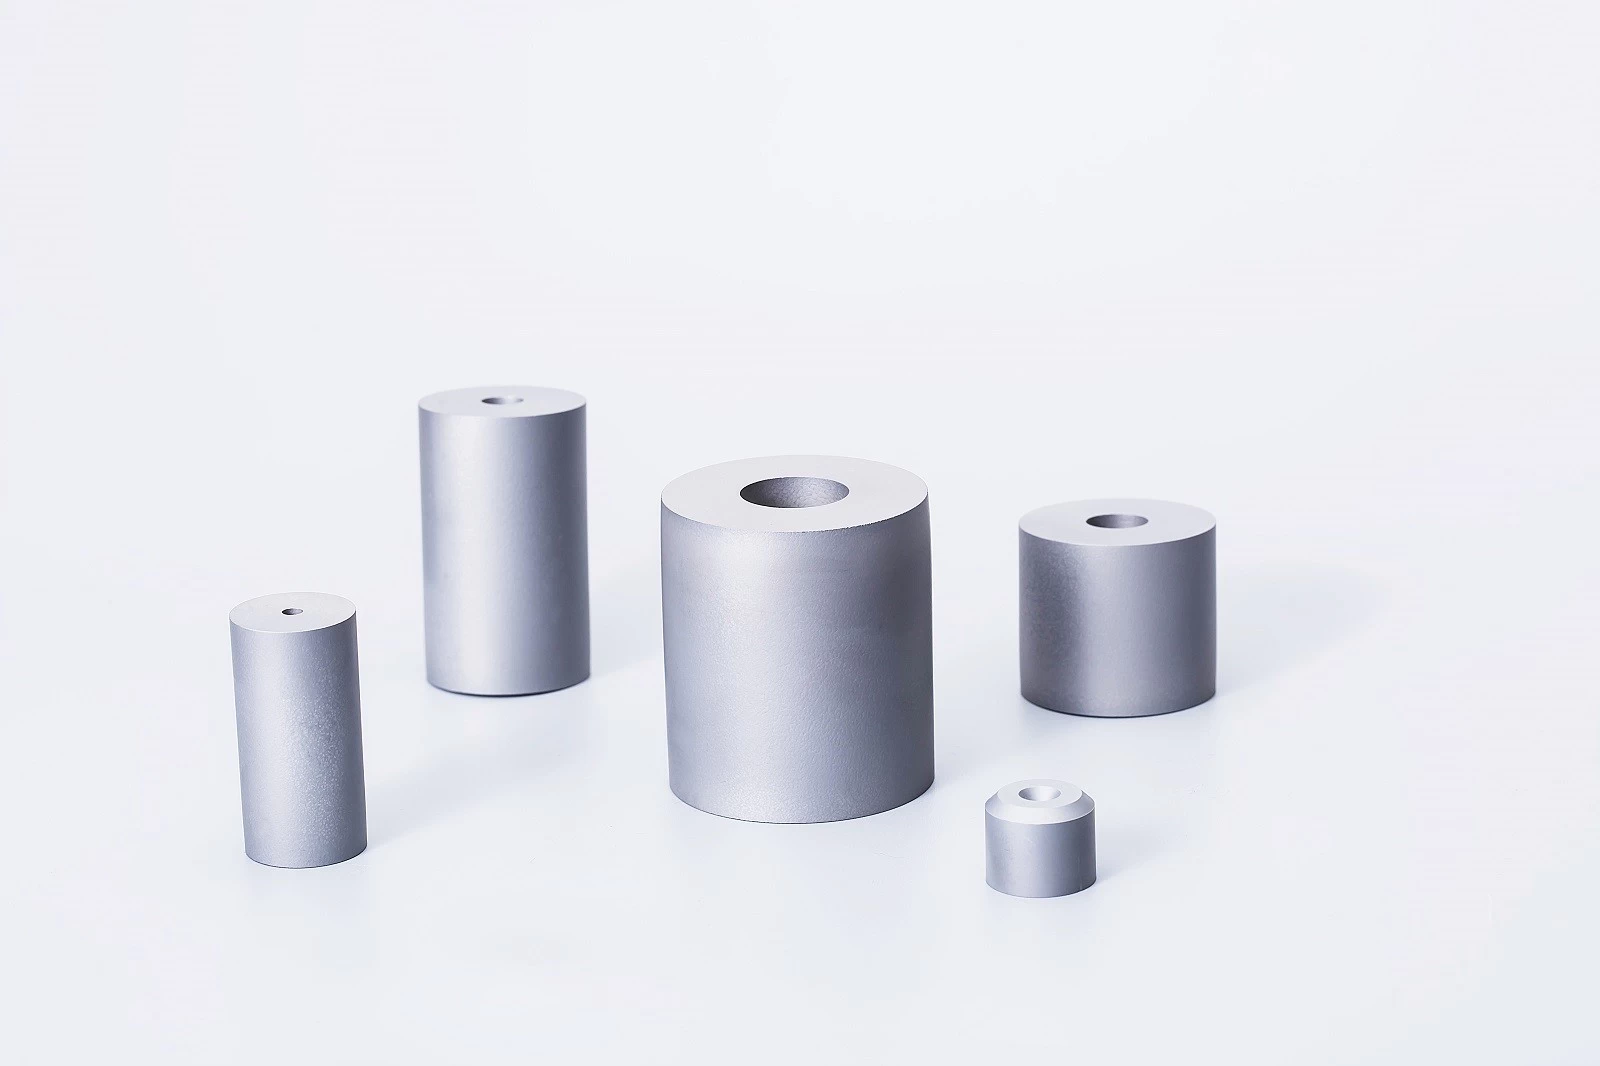 China Cemented Carbide Dies manufacturer